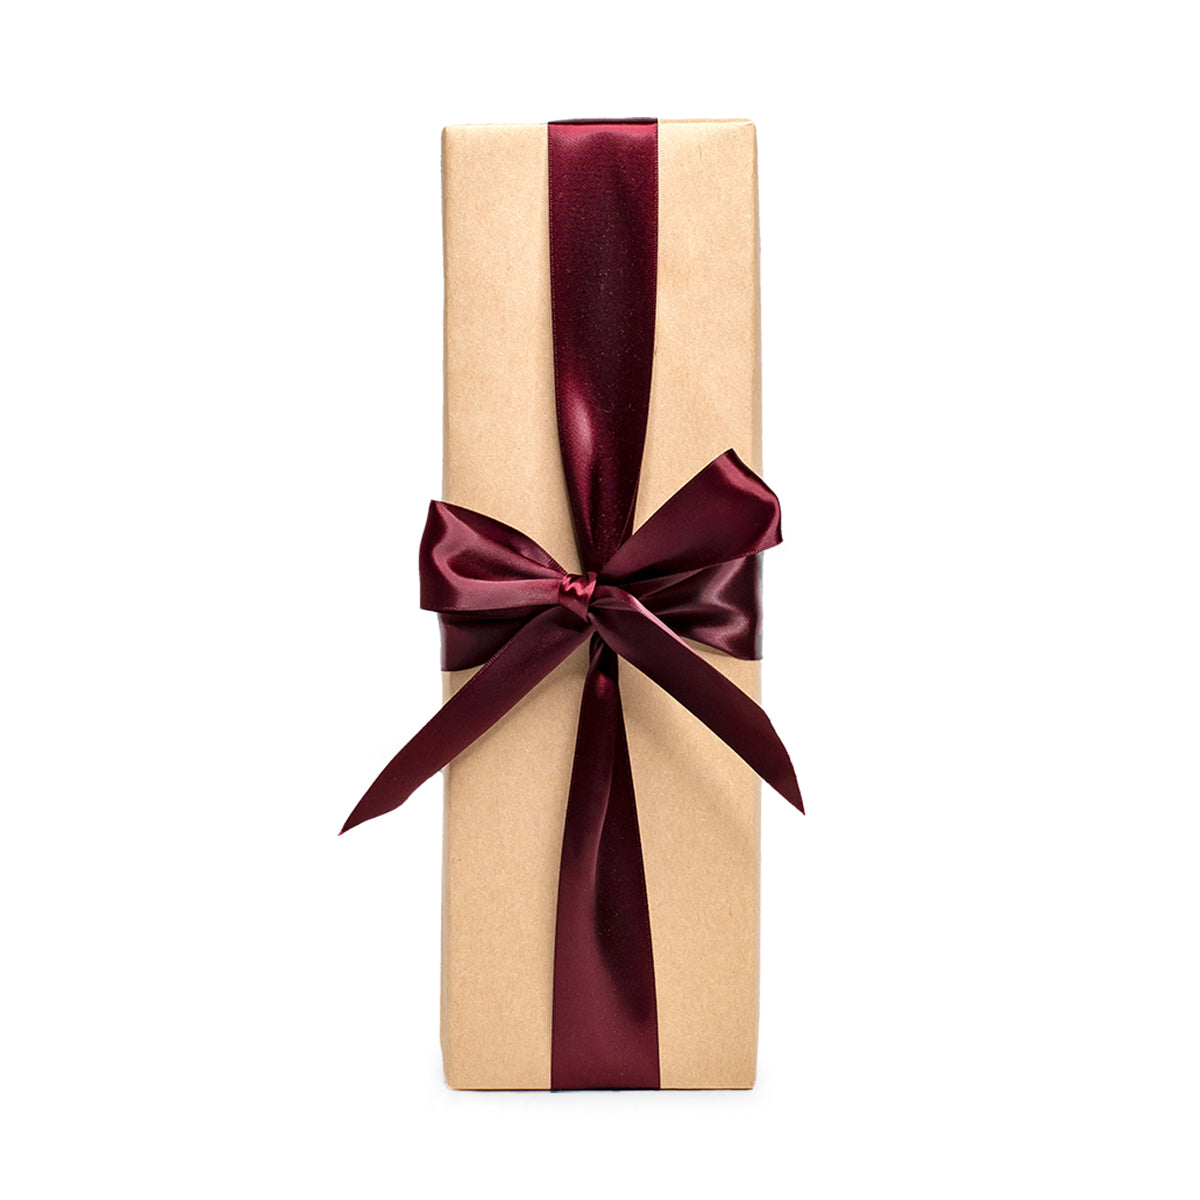 COMPLIMENTARY GIFT-WRAP